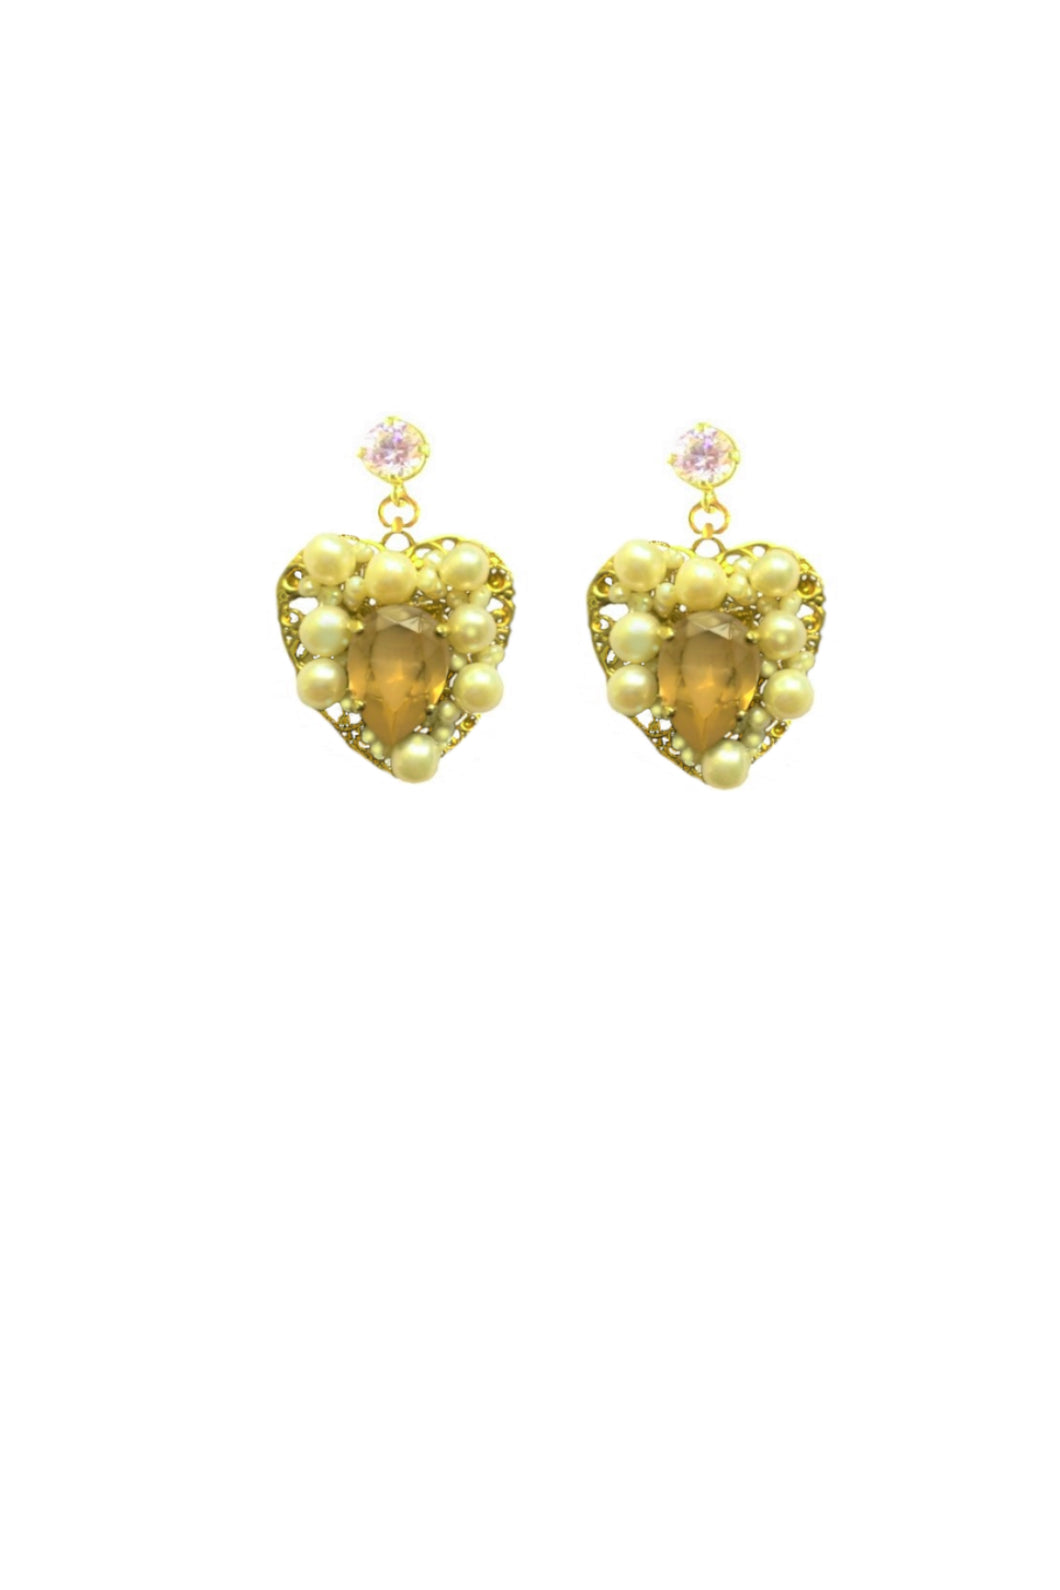 Gold Champagne Swarovski Crystals and Pearls Earrings